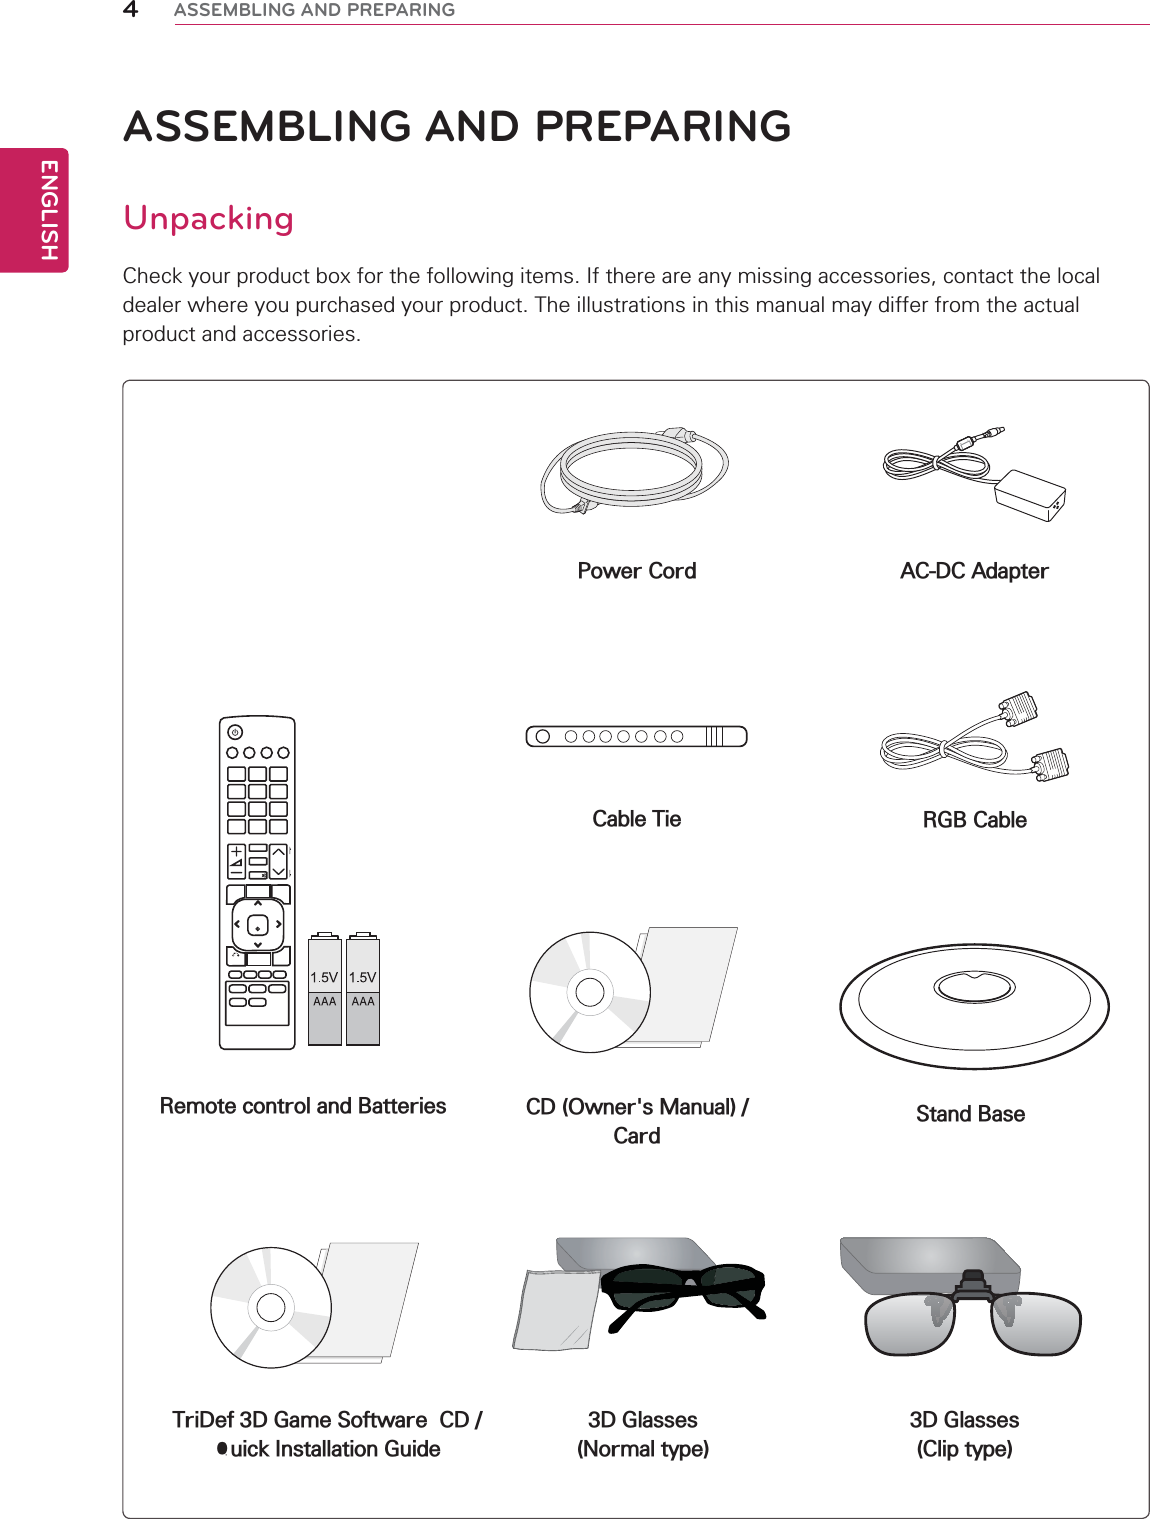 ENGLISH4ASSEMBLING AND PREPARINGASSEMBLING AND PREPARINGUnpackingCheck your product box for the following items. If there are any missing accessories, contact the local dealer where you purchased your product. The illustrations in this manual may differ from the actual product and accessories.Remote control and Batteries Stand BasePower CordCable TieCD (Owner&apos;s Manual) /CardTriDef 3D Game Software  CD /Quick Installation Guide3D Glasses(Normal type)3D Glasses(Clip type)AC-DC AdapterRGB Cable